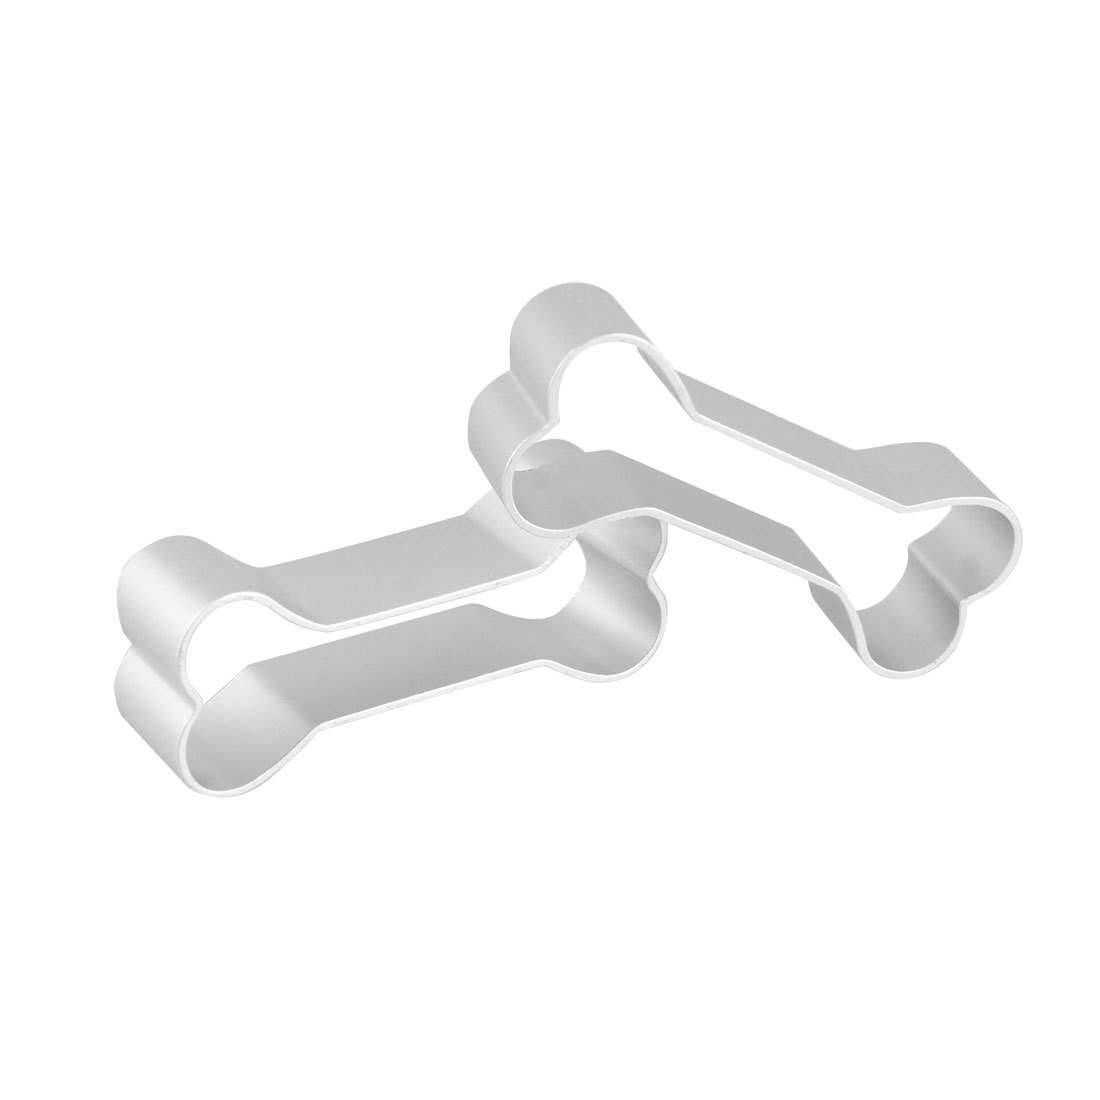 3Pcs//Set  Dog Bone Shaped Biscuit Cake Cookie Cutter Mold Mould Silver Toneo`US